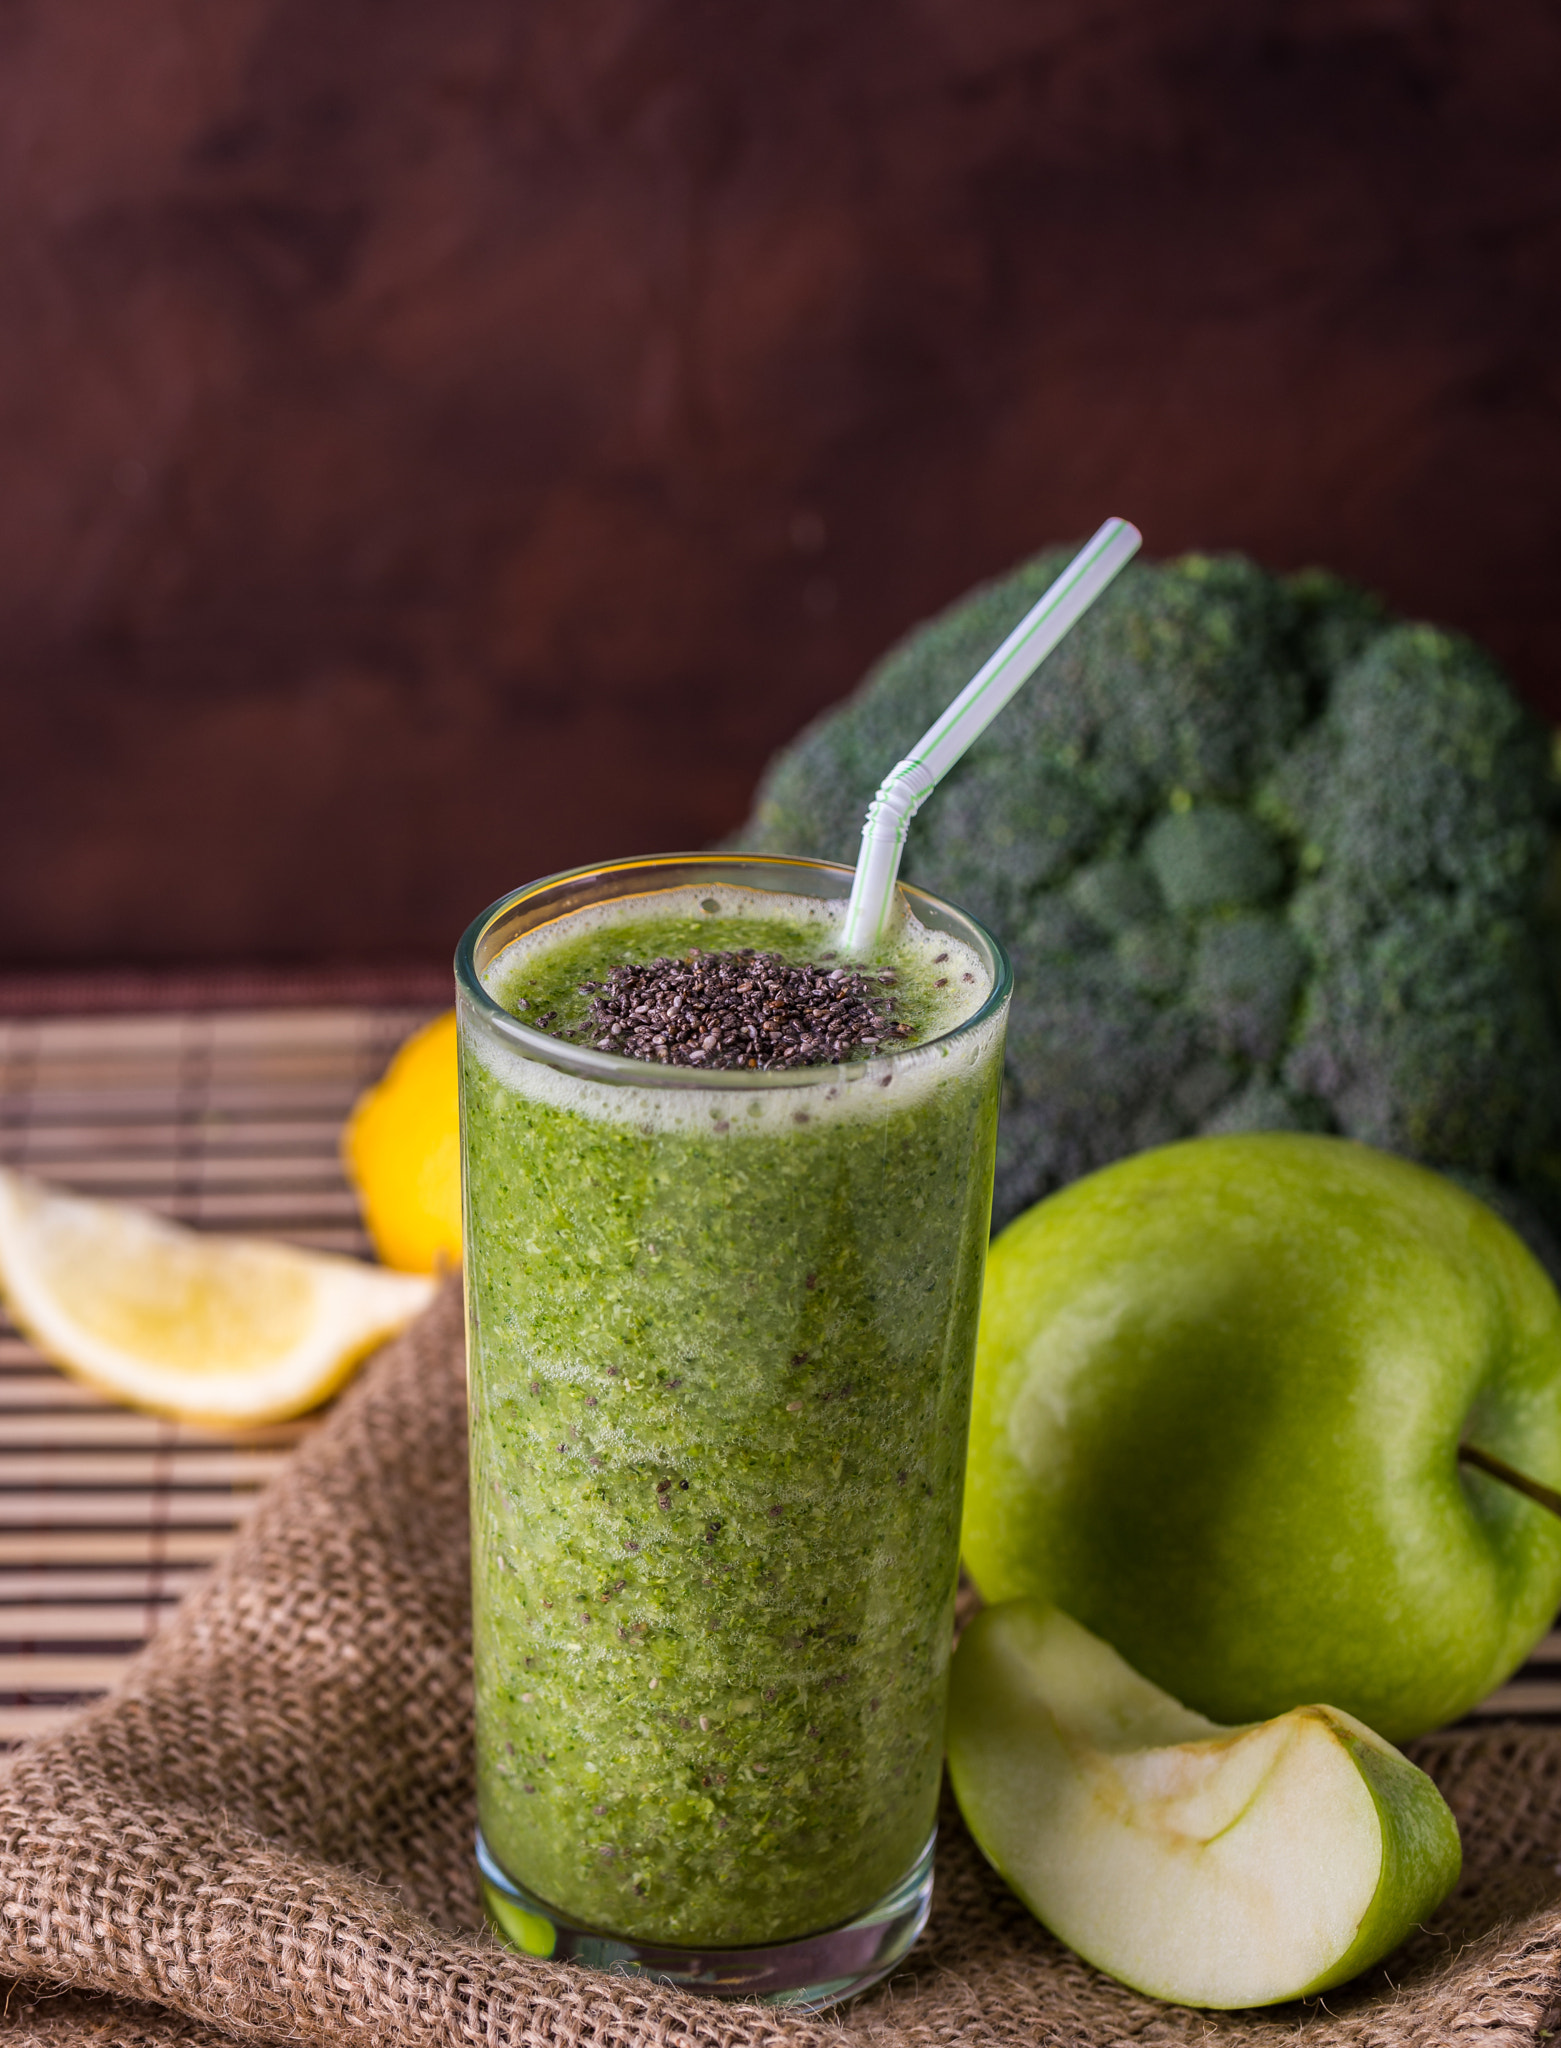 Nikon D610 + Tamron SP 90mm F2.8 Di VC USD 1:1 Macro (F004) sample photo. Broccoli smoothie in glass bowl on wooden background with lemon photography